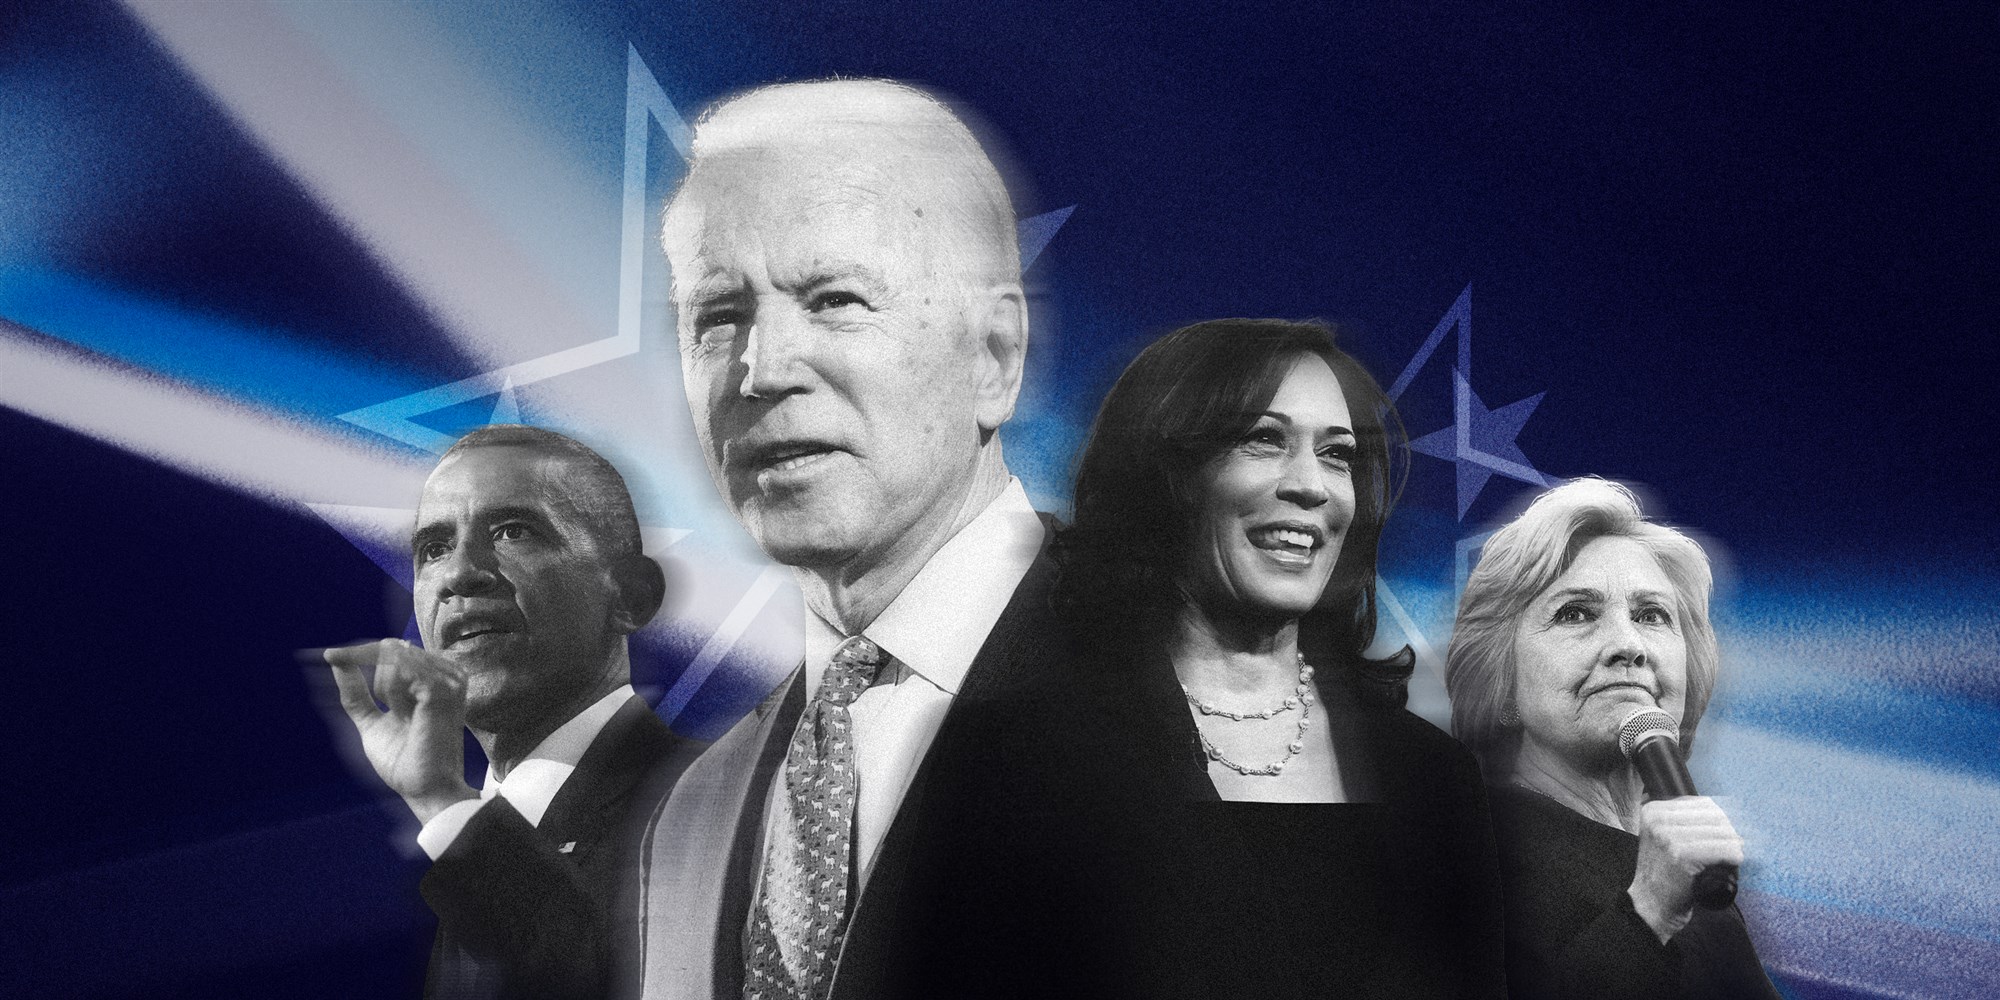 A photoshopped graphic of Joe Biden, Barack Obama, Kamala Harris, and Hillary Clinton staring in different directions against a black and blue background